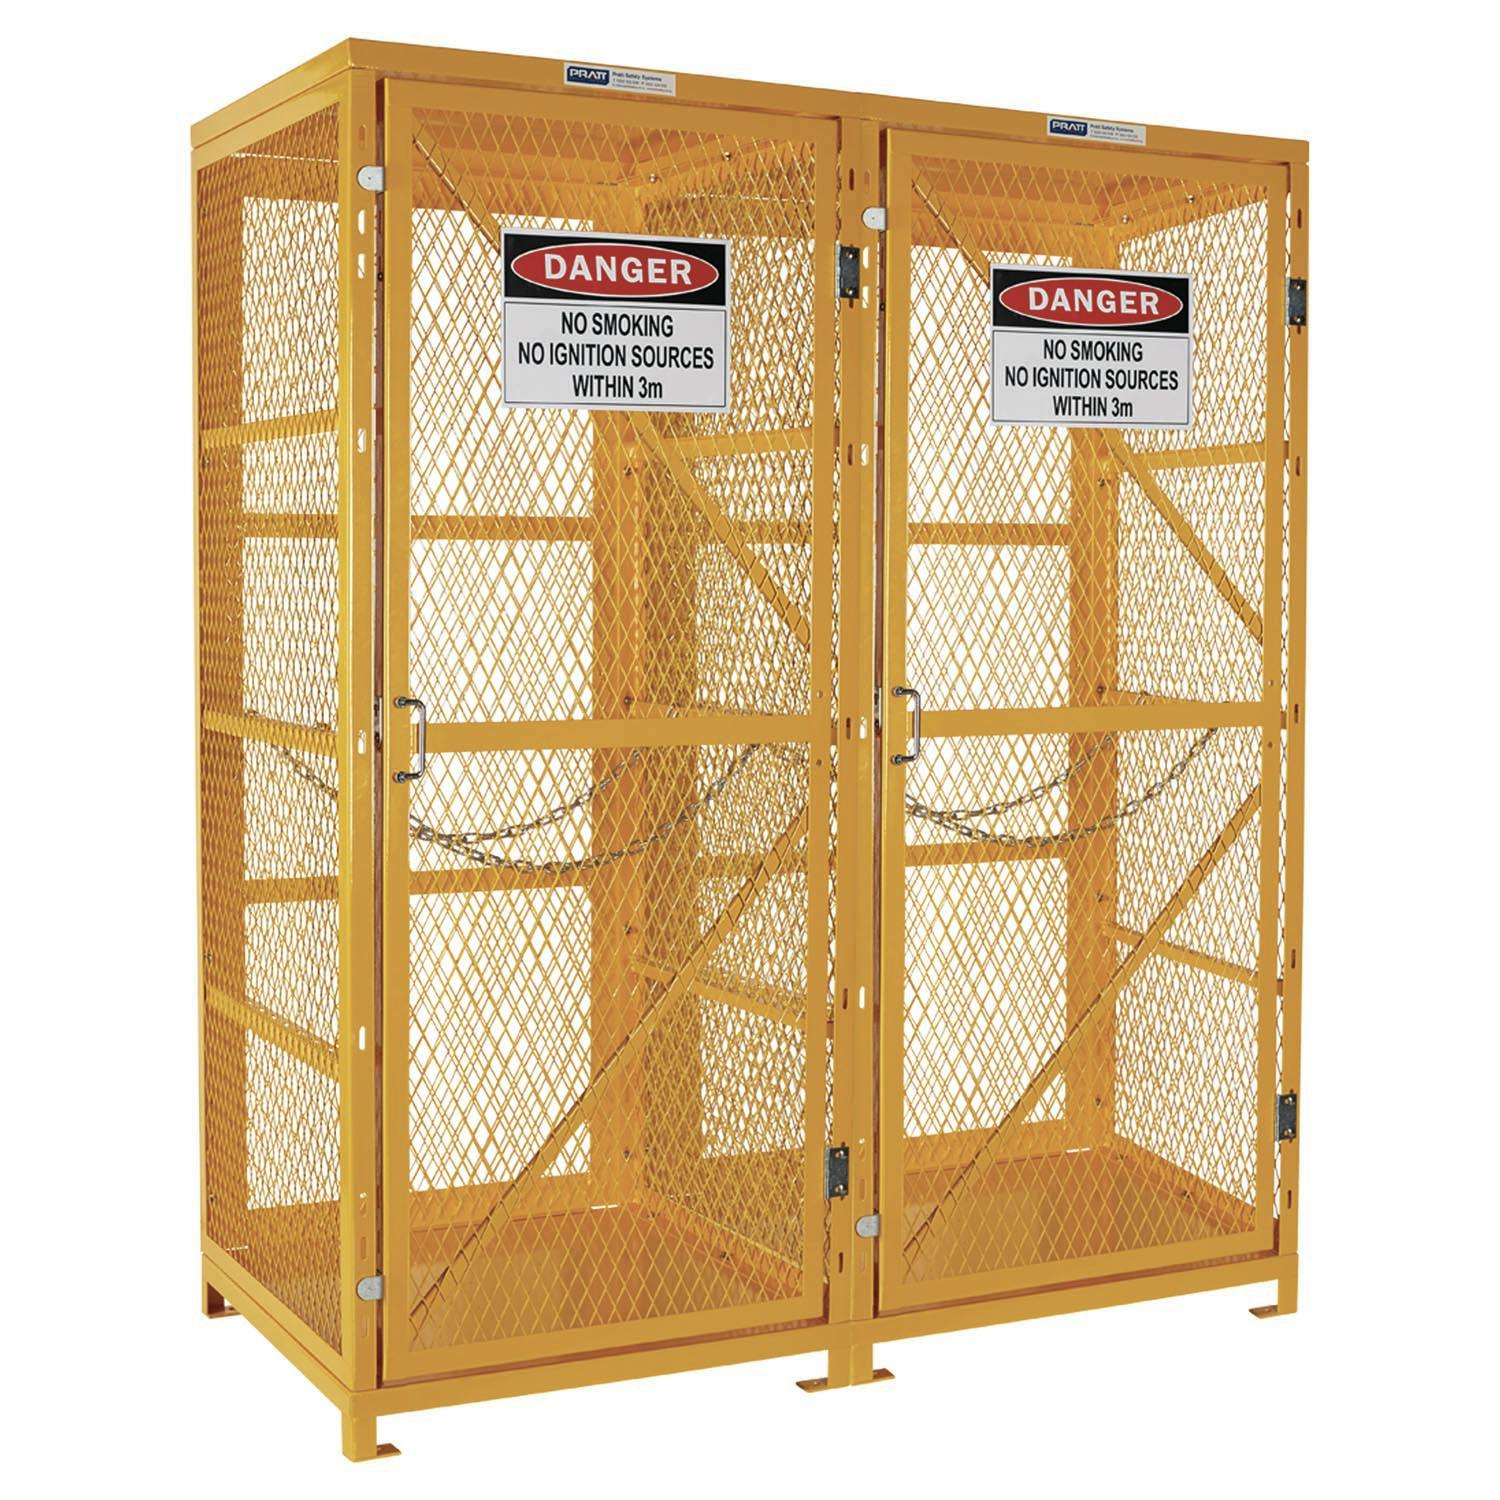 Pratt Gas Cylinder Storage Cage. 1 Storage Level Up To 18 G-Sized Cylinders. (Comes Flat Packed - Assembly Required)